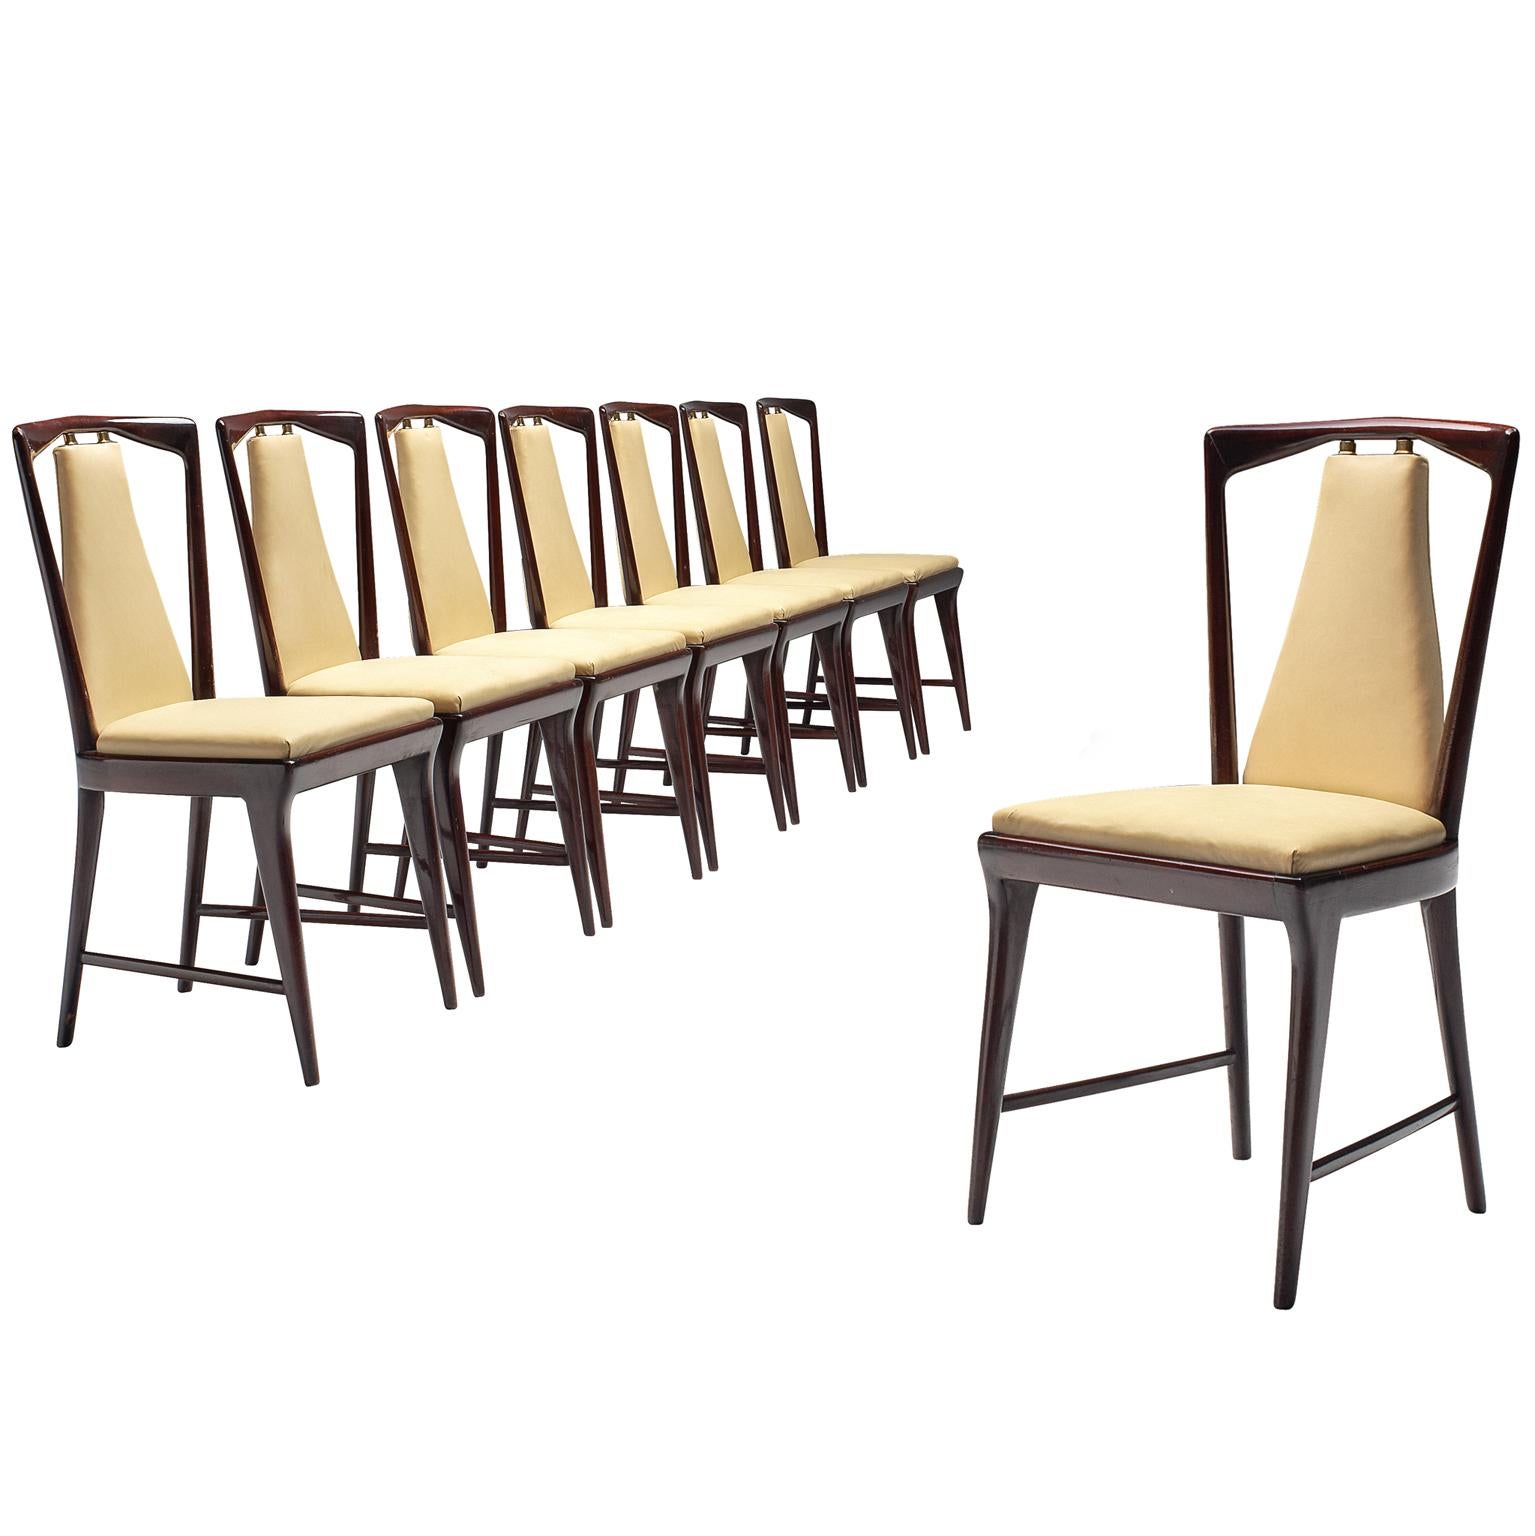 Italian Set of Dining Chairs, 1950s